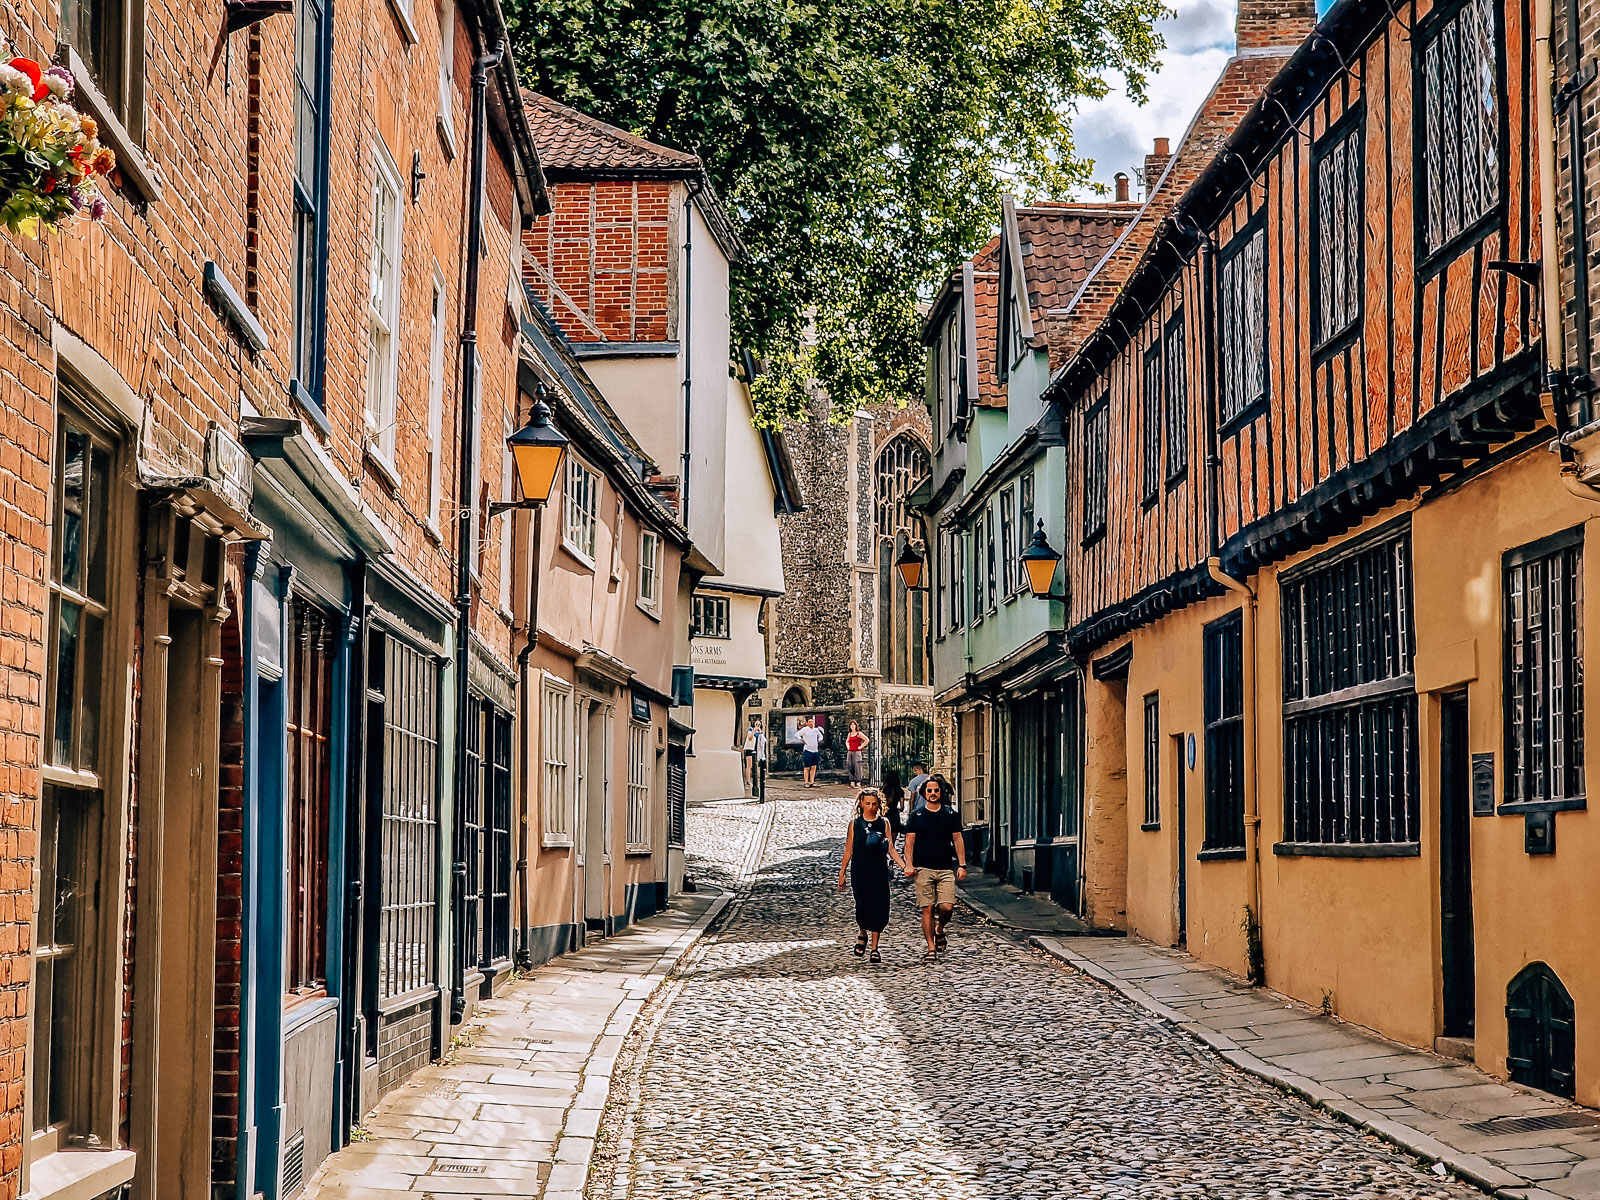 A cobbled street lined with timber frame houses nd a church visible at the end of the street in Elm Hill Norwich on a England weekend away